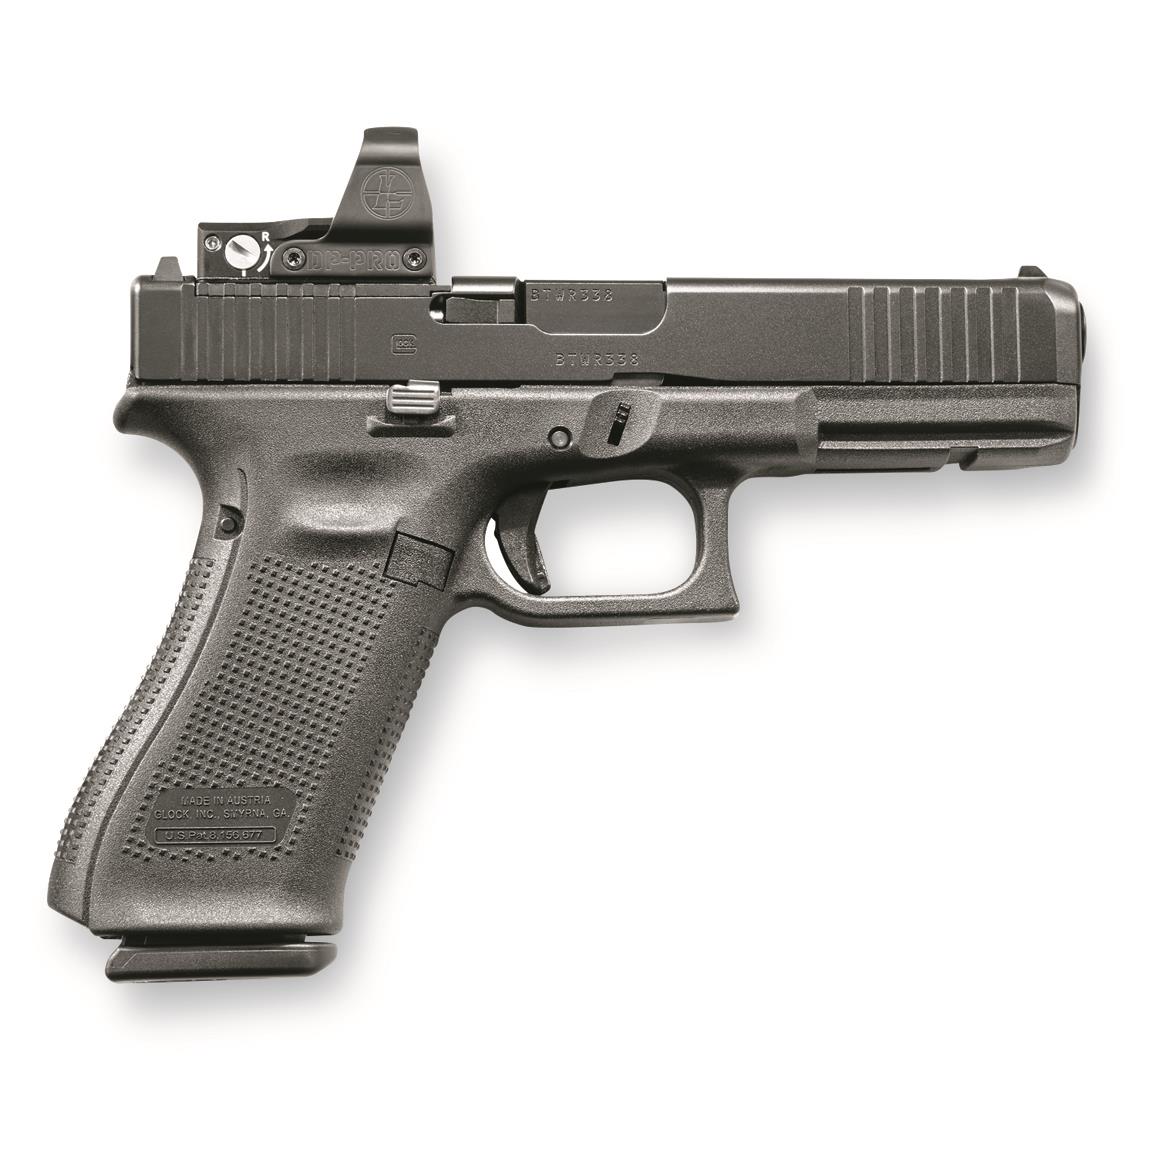 Glock 17 Gen5 MOS, Semi-Automatic, 9mm, 4.49" Barrel, 17+1 Rounds, Leupold DeltaPoint Pro